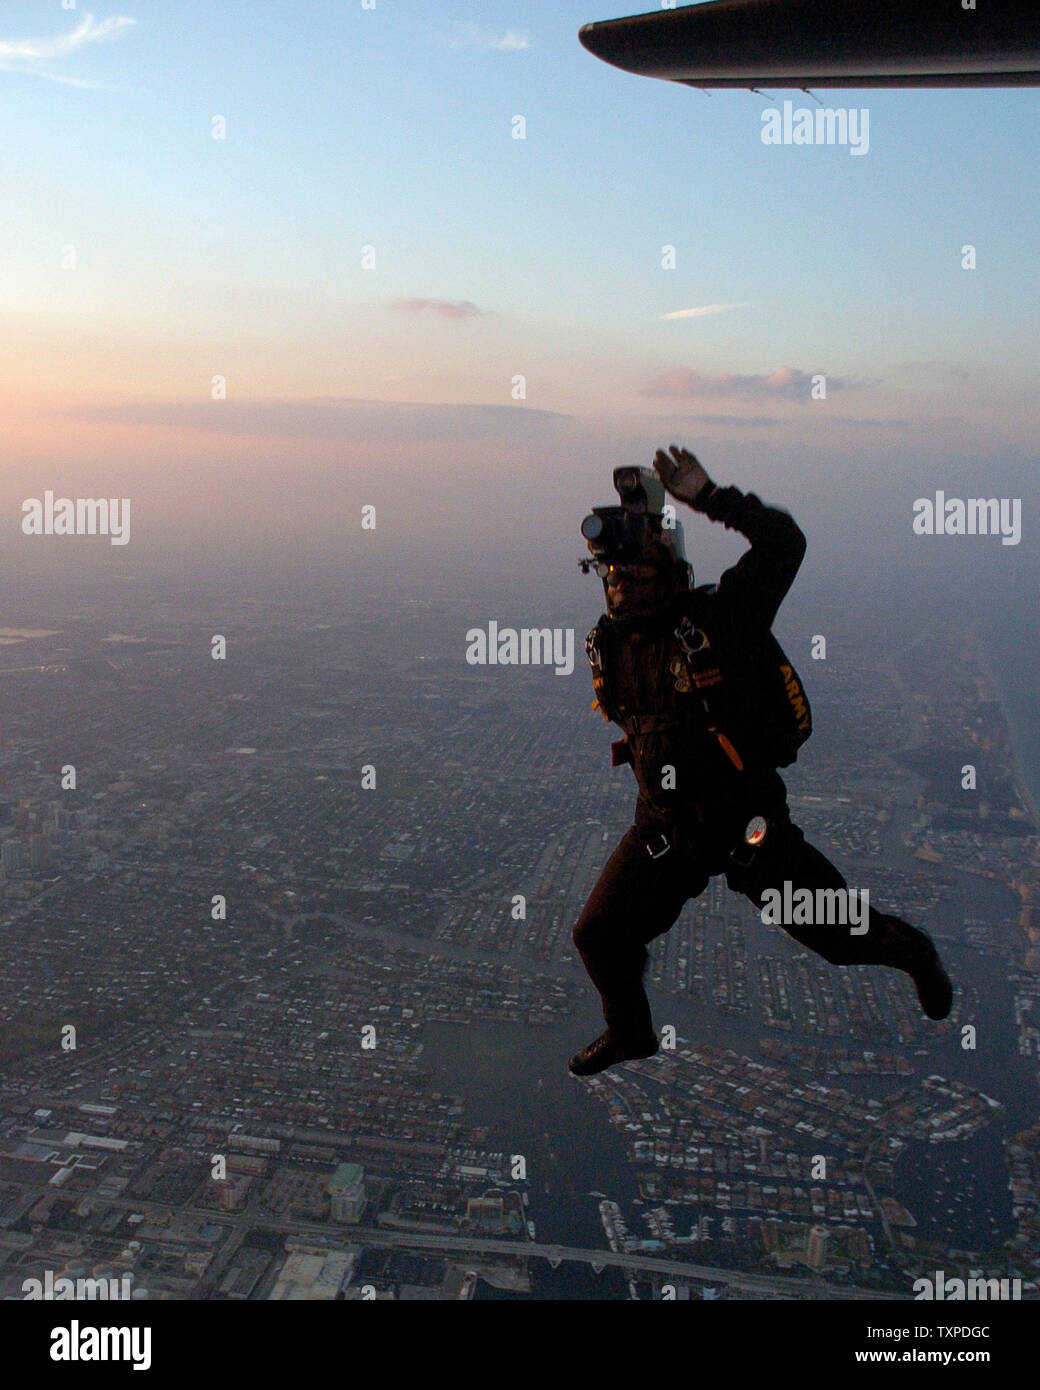 Sgt.Marc Owens of the US Army Golden Knghts Parachute Team jumps at dusk over Port Everglades in Ft. Lauderdale, Florida on May 5, 2006. The team is on hand to participate in the 2006 McDonald's Air and Sea Show on May 6 and 7th. (UPI Photo/Joe Marino-Bill Cantrell) Stock Photo